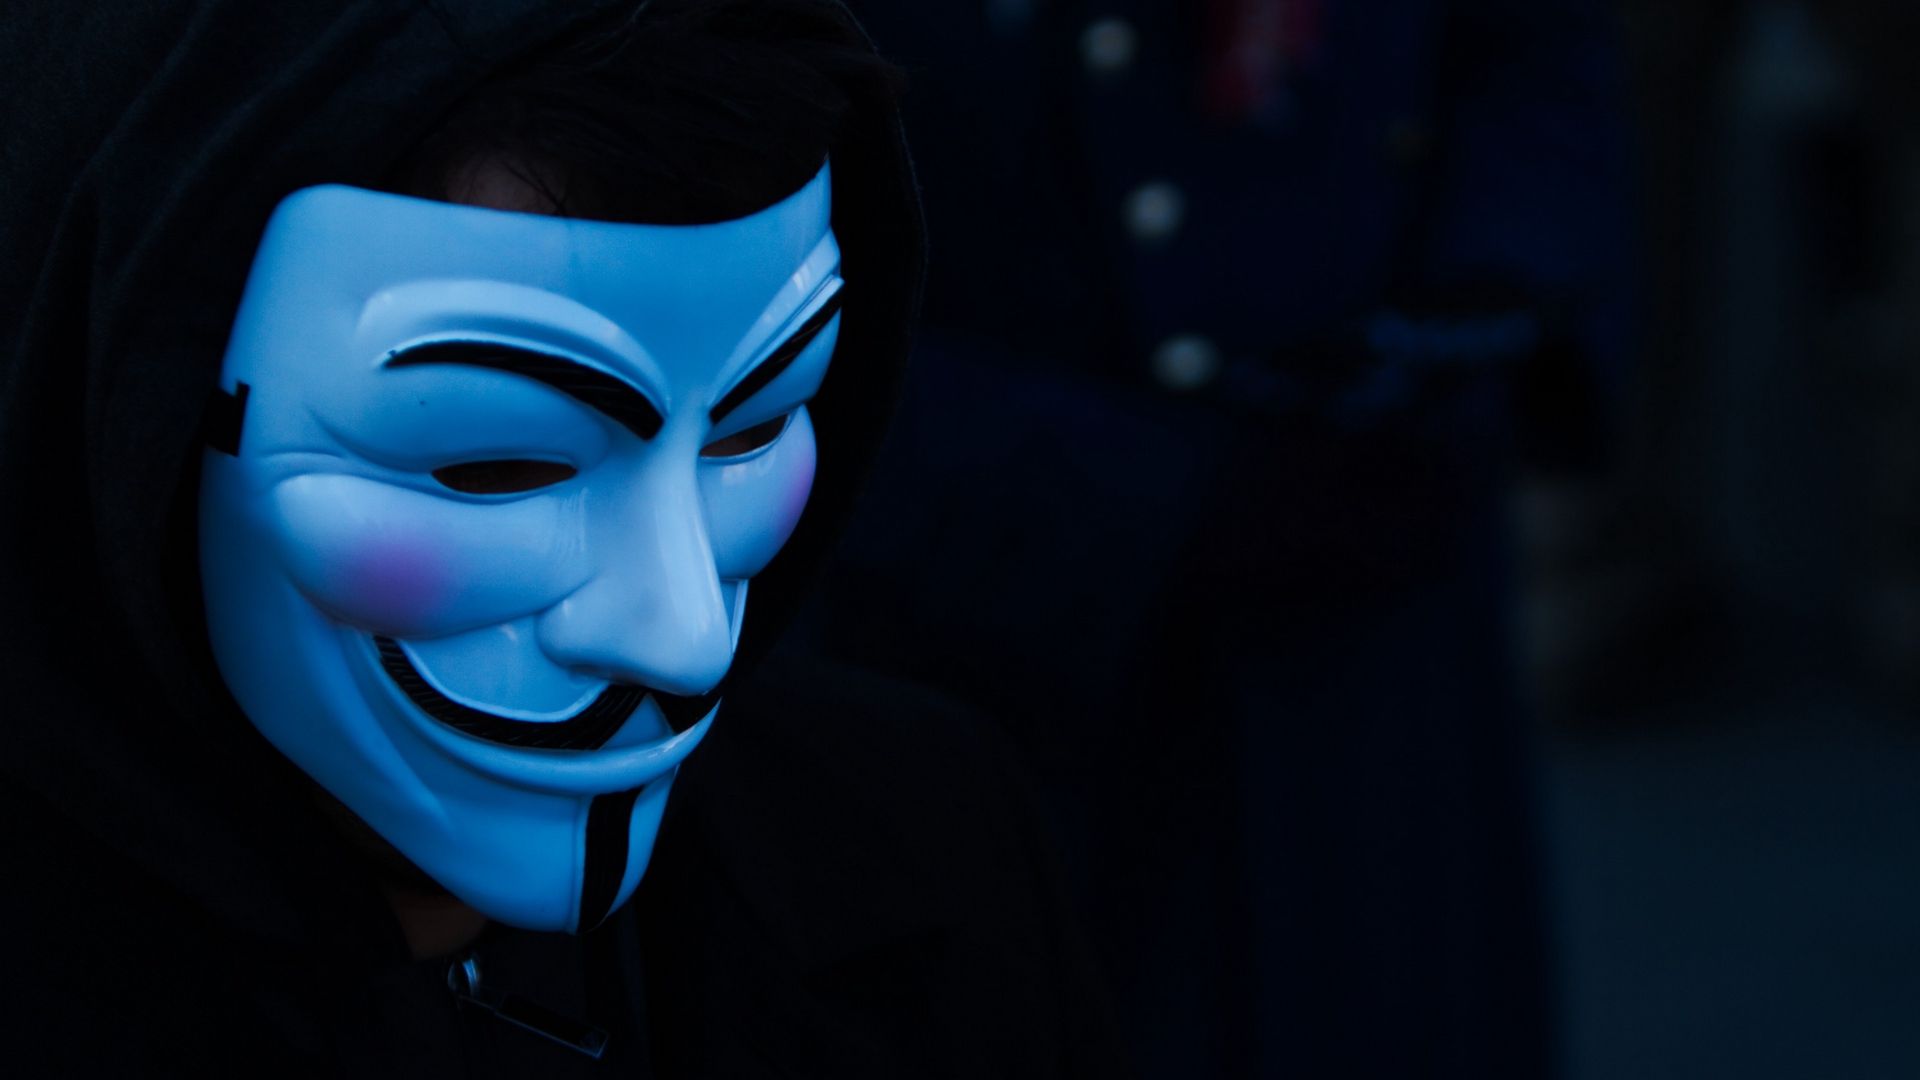 Download wallpaper 1920x1080 mask, hood, anonymous, face full HD